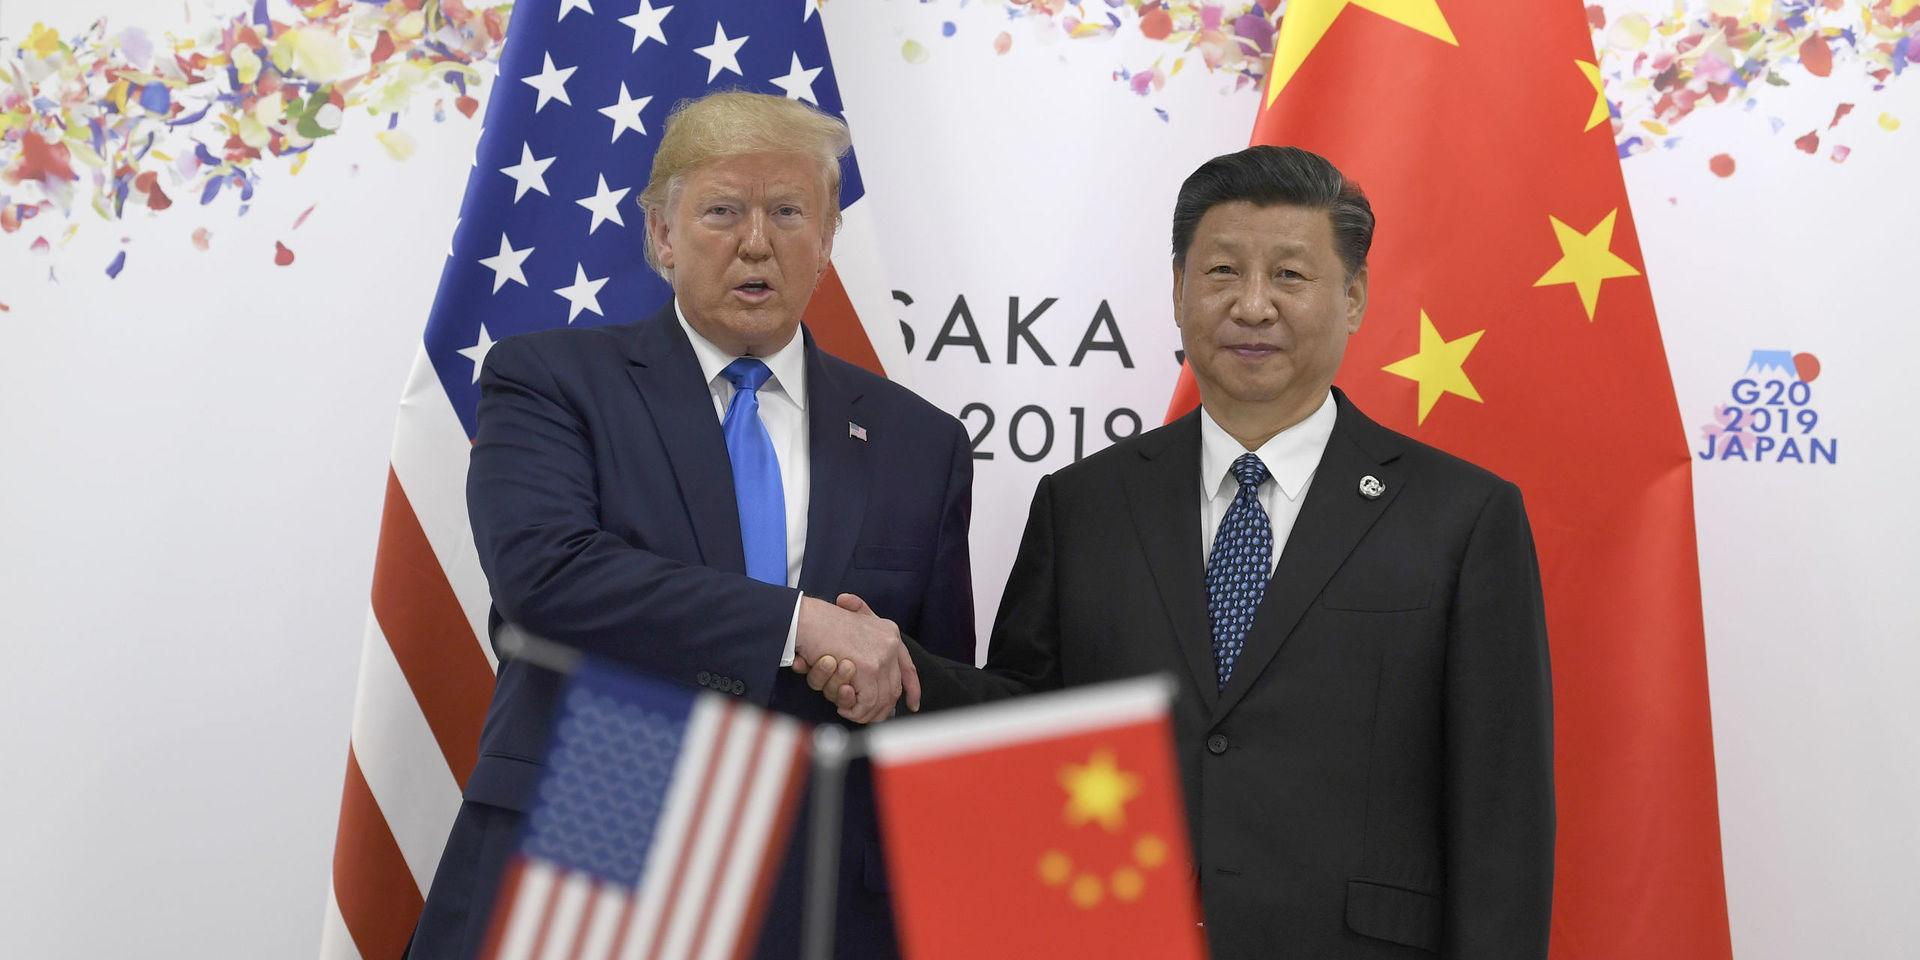 President Donald Trump shakes hands with Chinese President Xi Jinping during a meeting on the sidelines of the G-20 summit in Osaka, Japan, Saturday, June 29, 2019. (AP Photo/Susan Walsh)